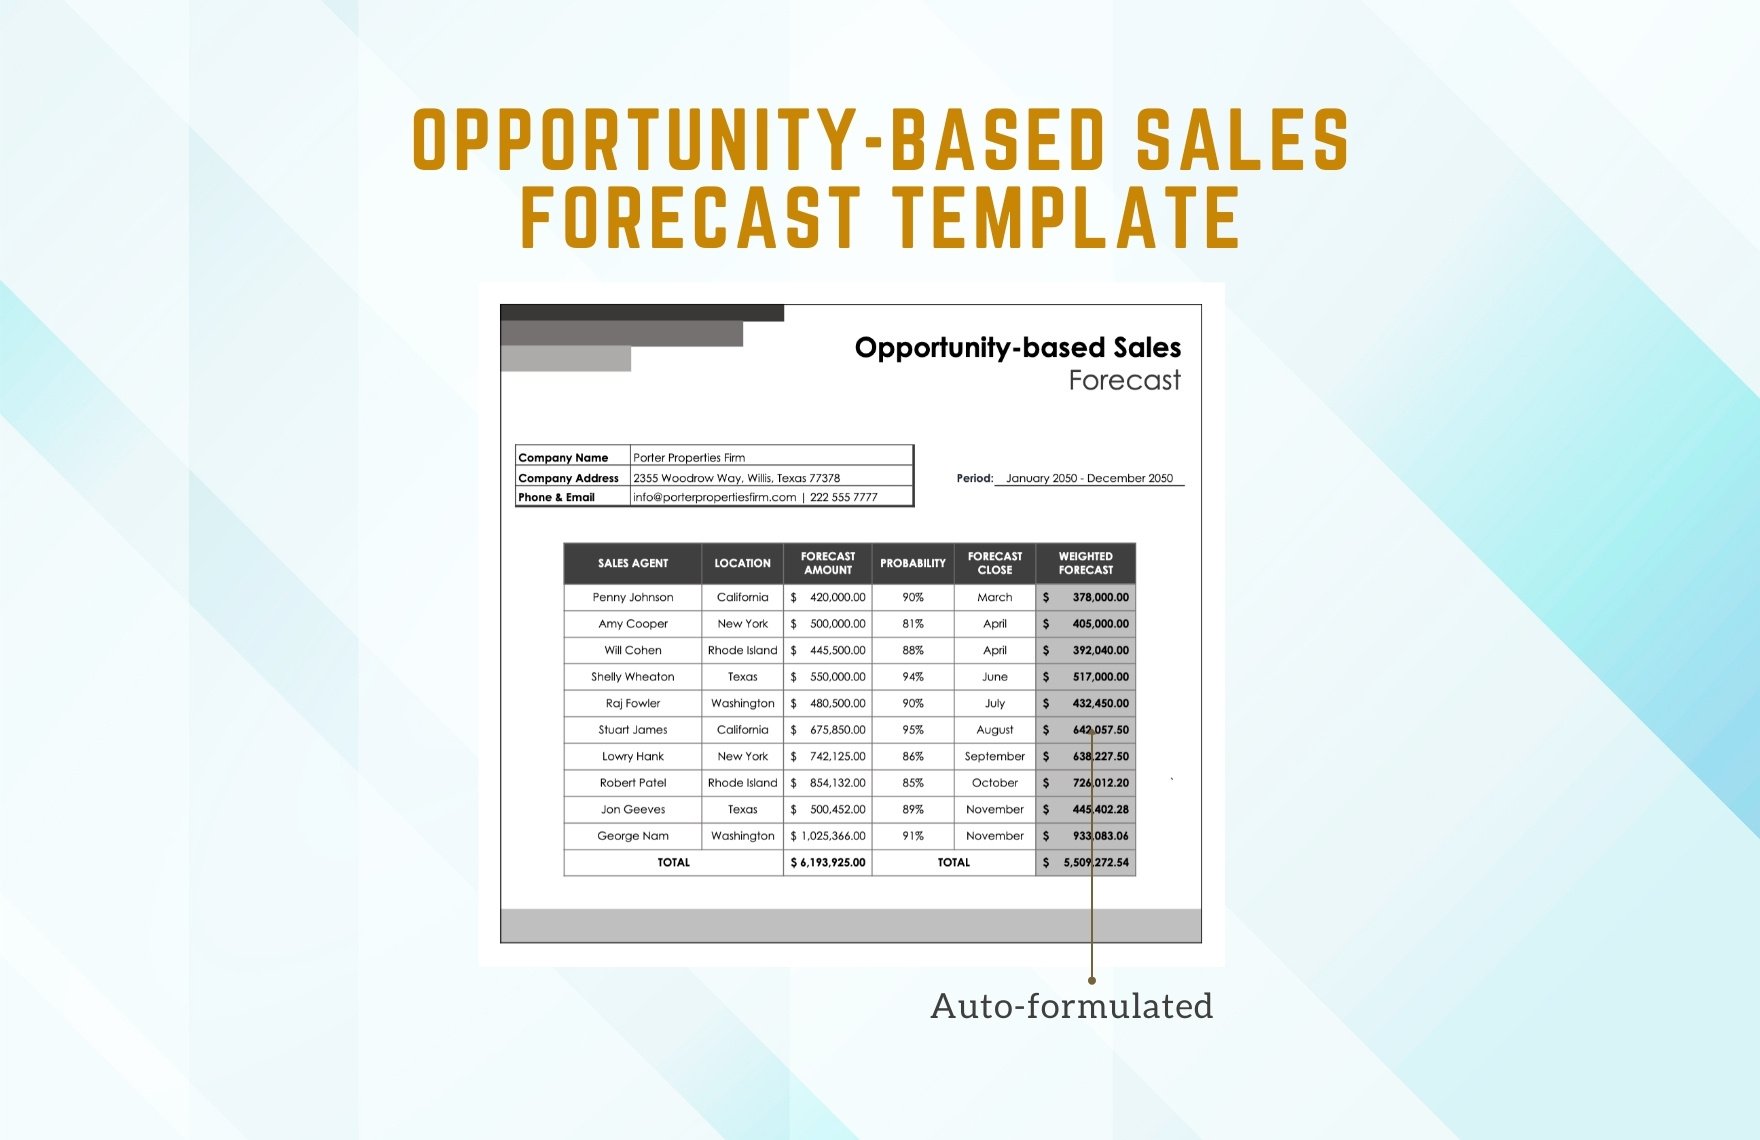 Opportunity-based Sales Forecast Template